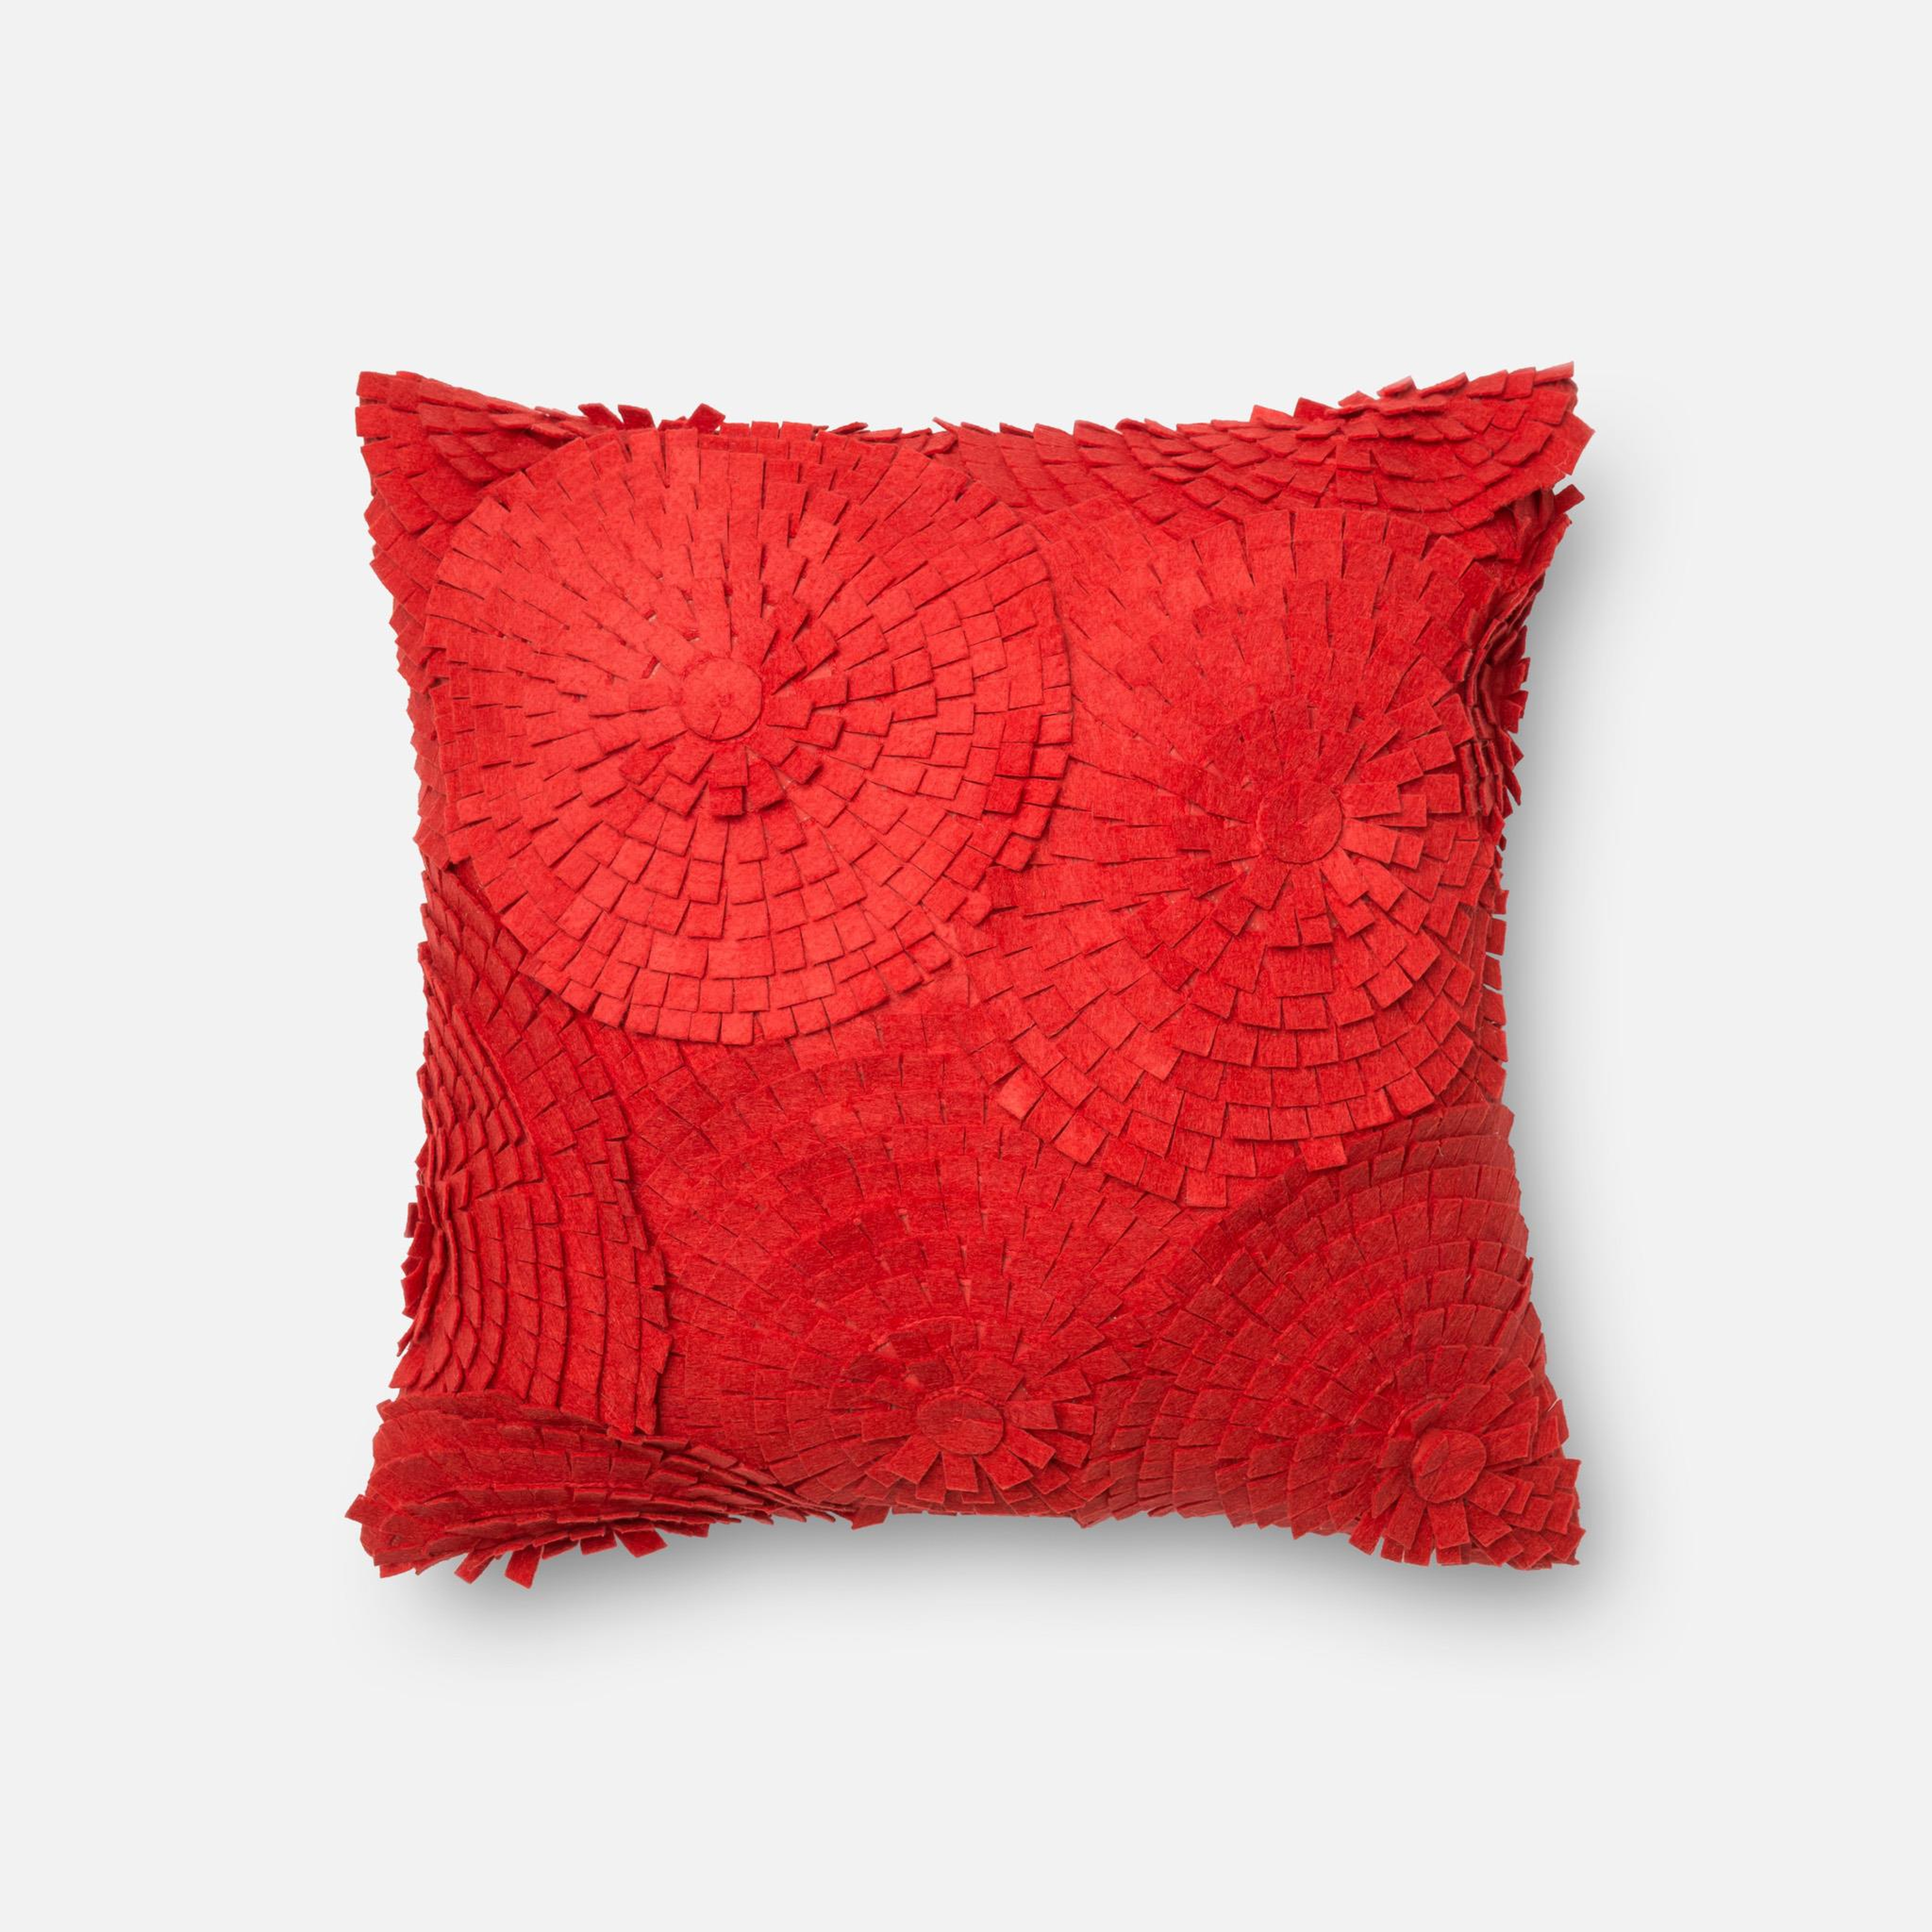 PILLOWS - RED - 18" X 18" Cover w/Down - Loloi II